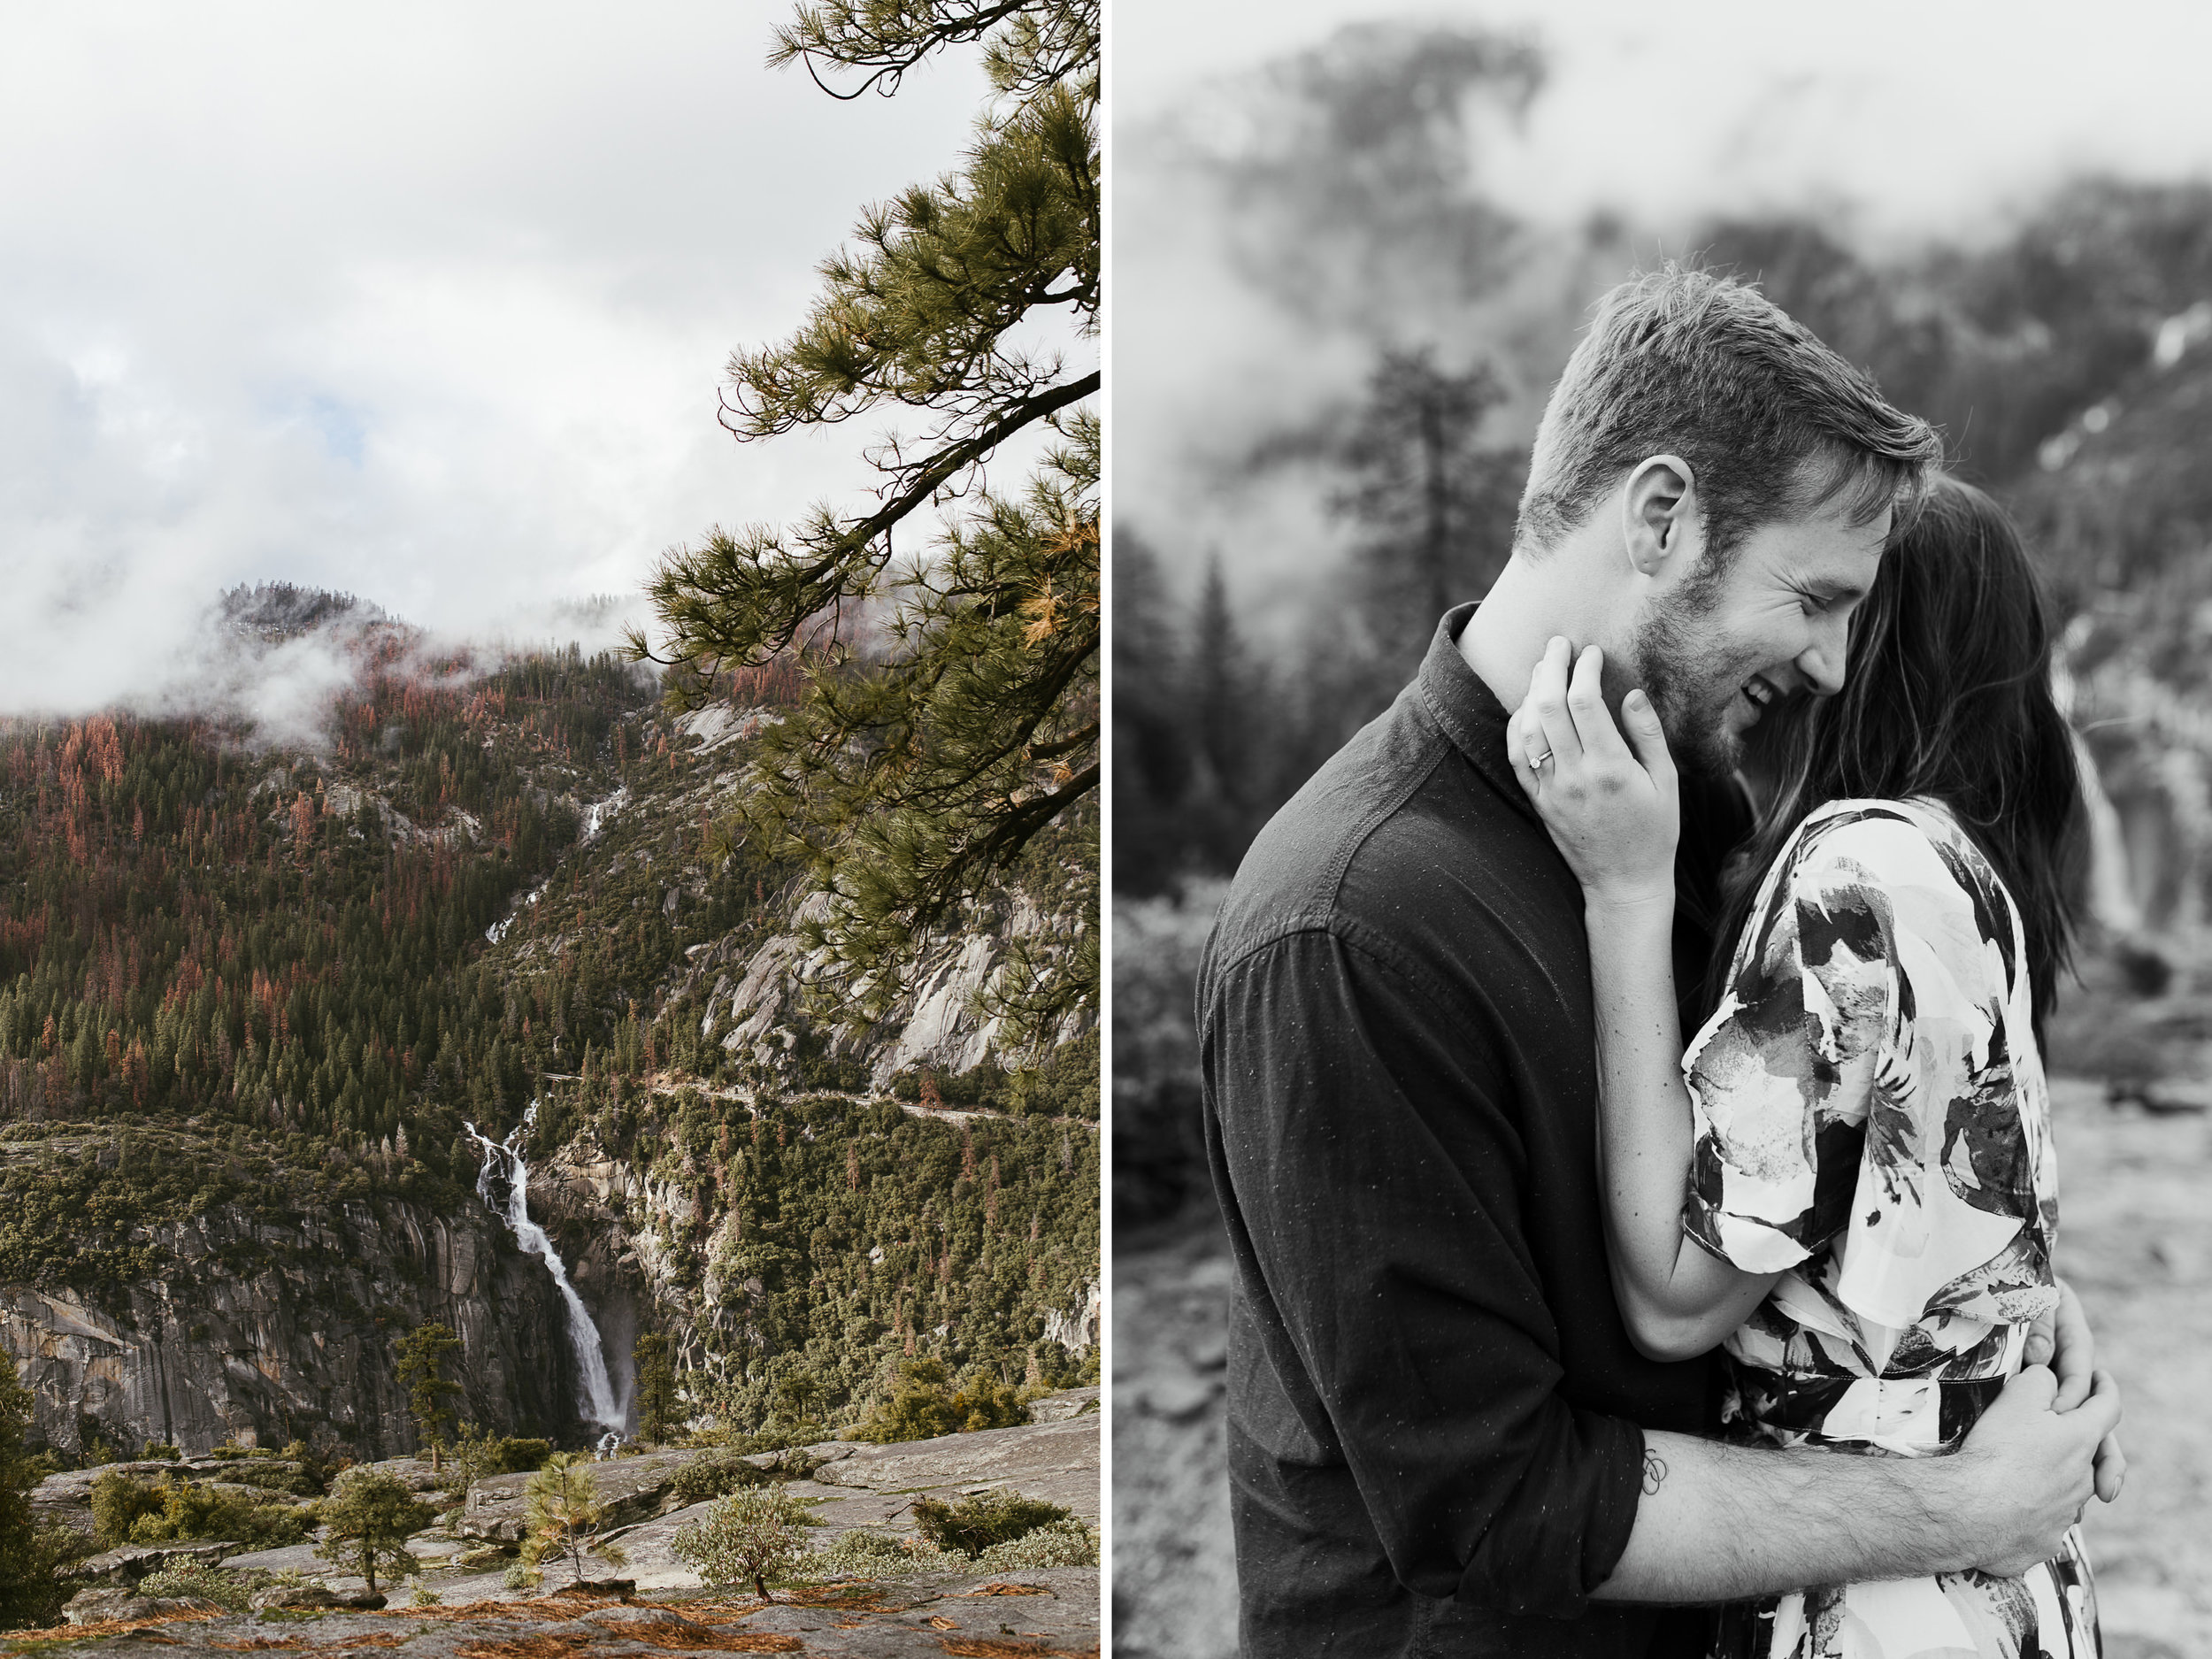 adventure engagement photo session in yosemite national park // california wedding and elopement photographer // www.abbihearne.com